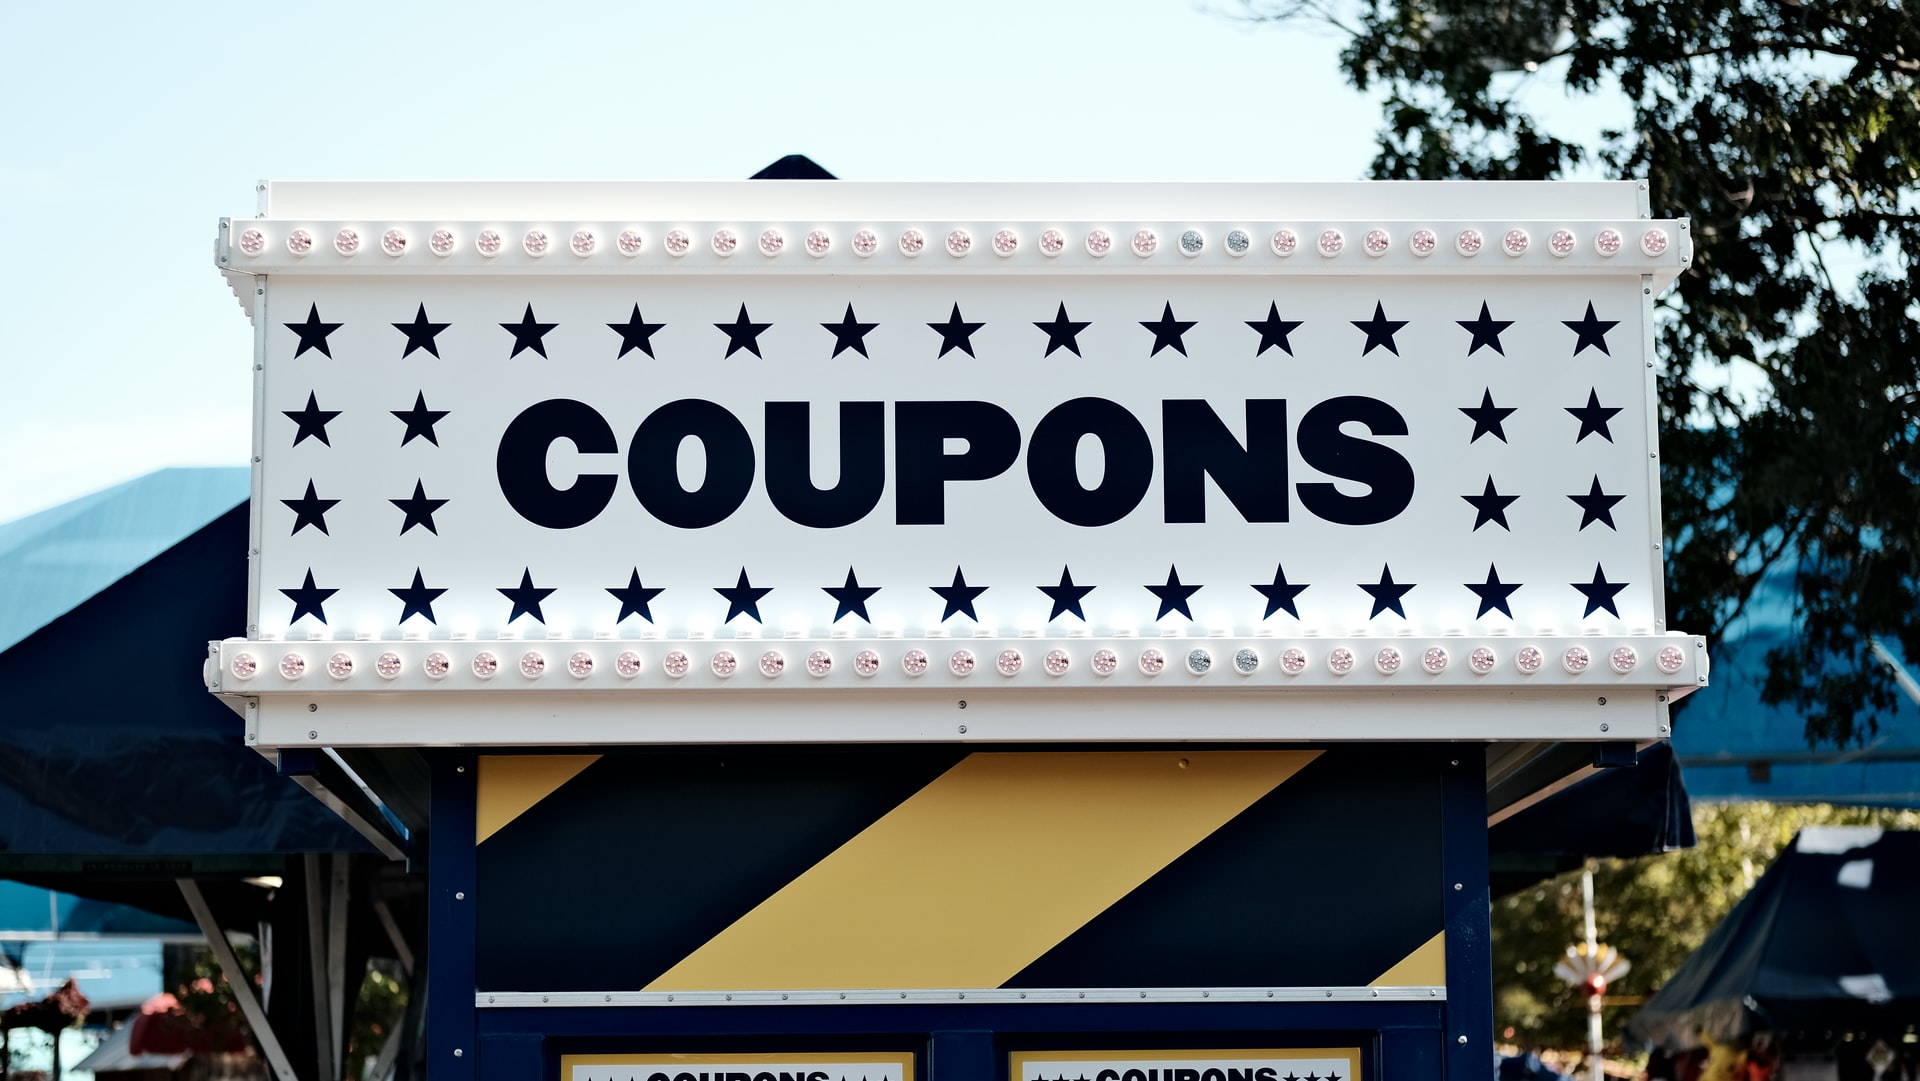 Coupons Are A Great Way To Attract Customers